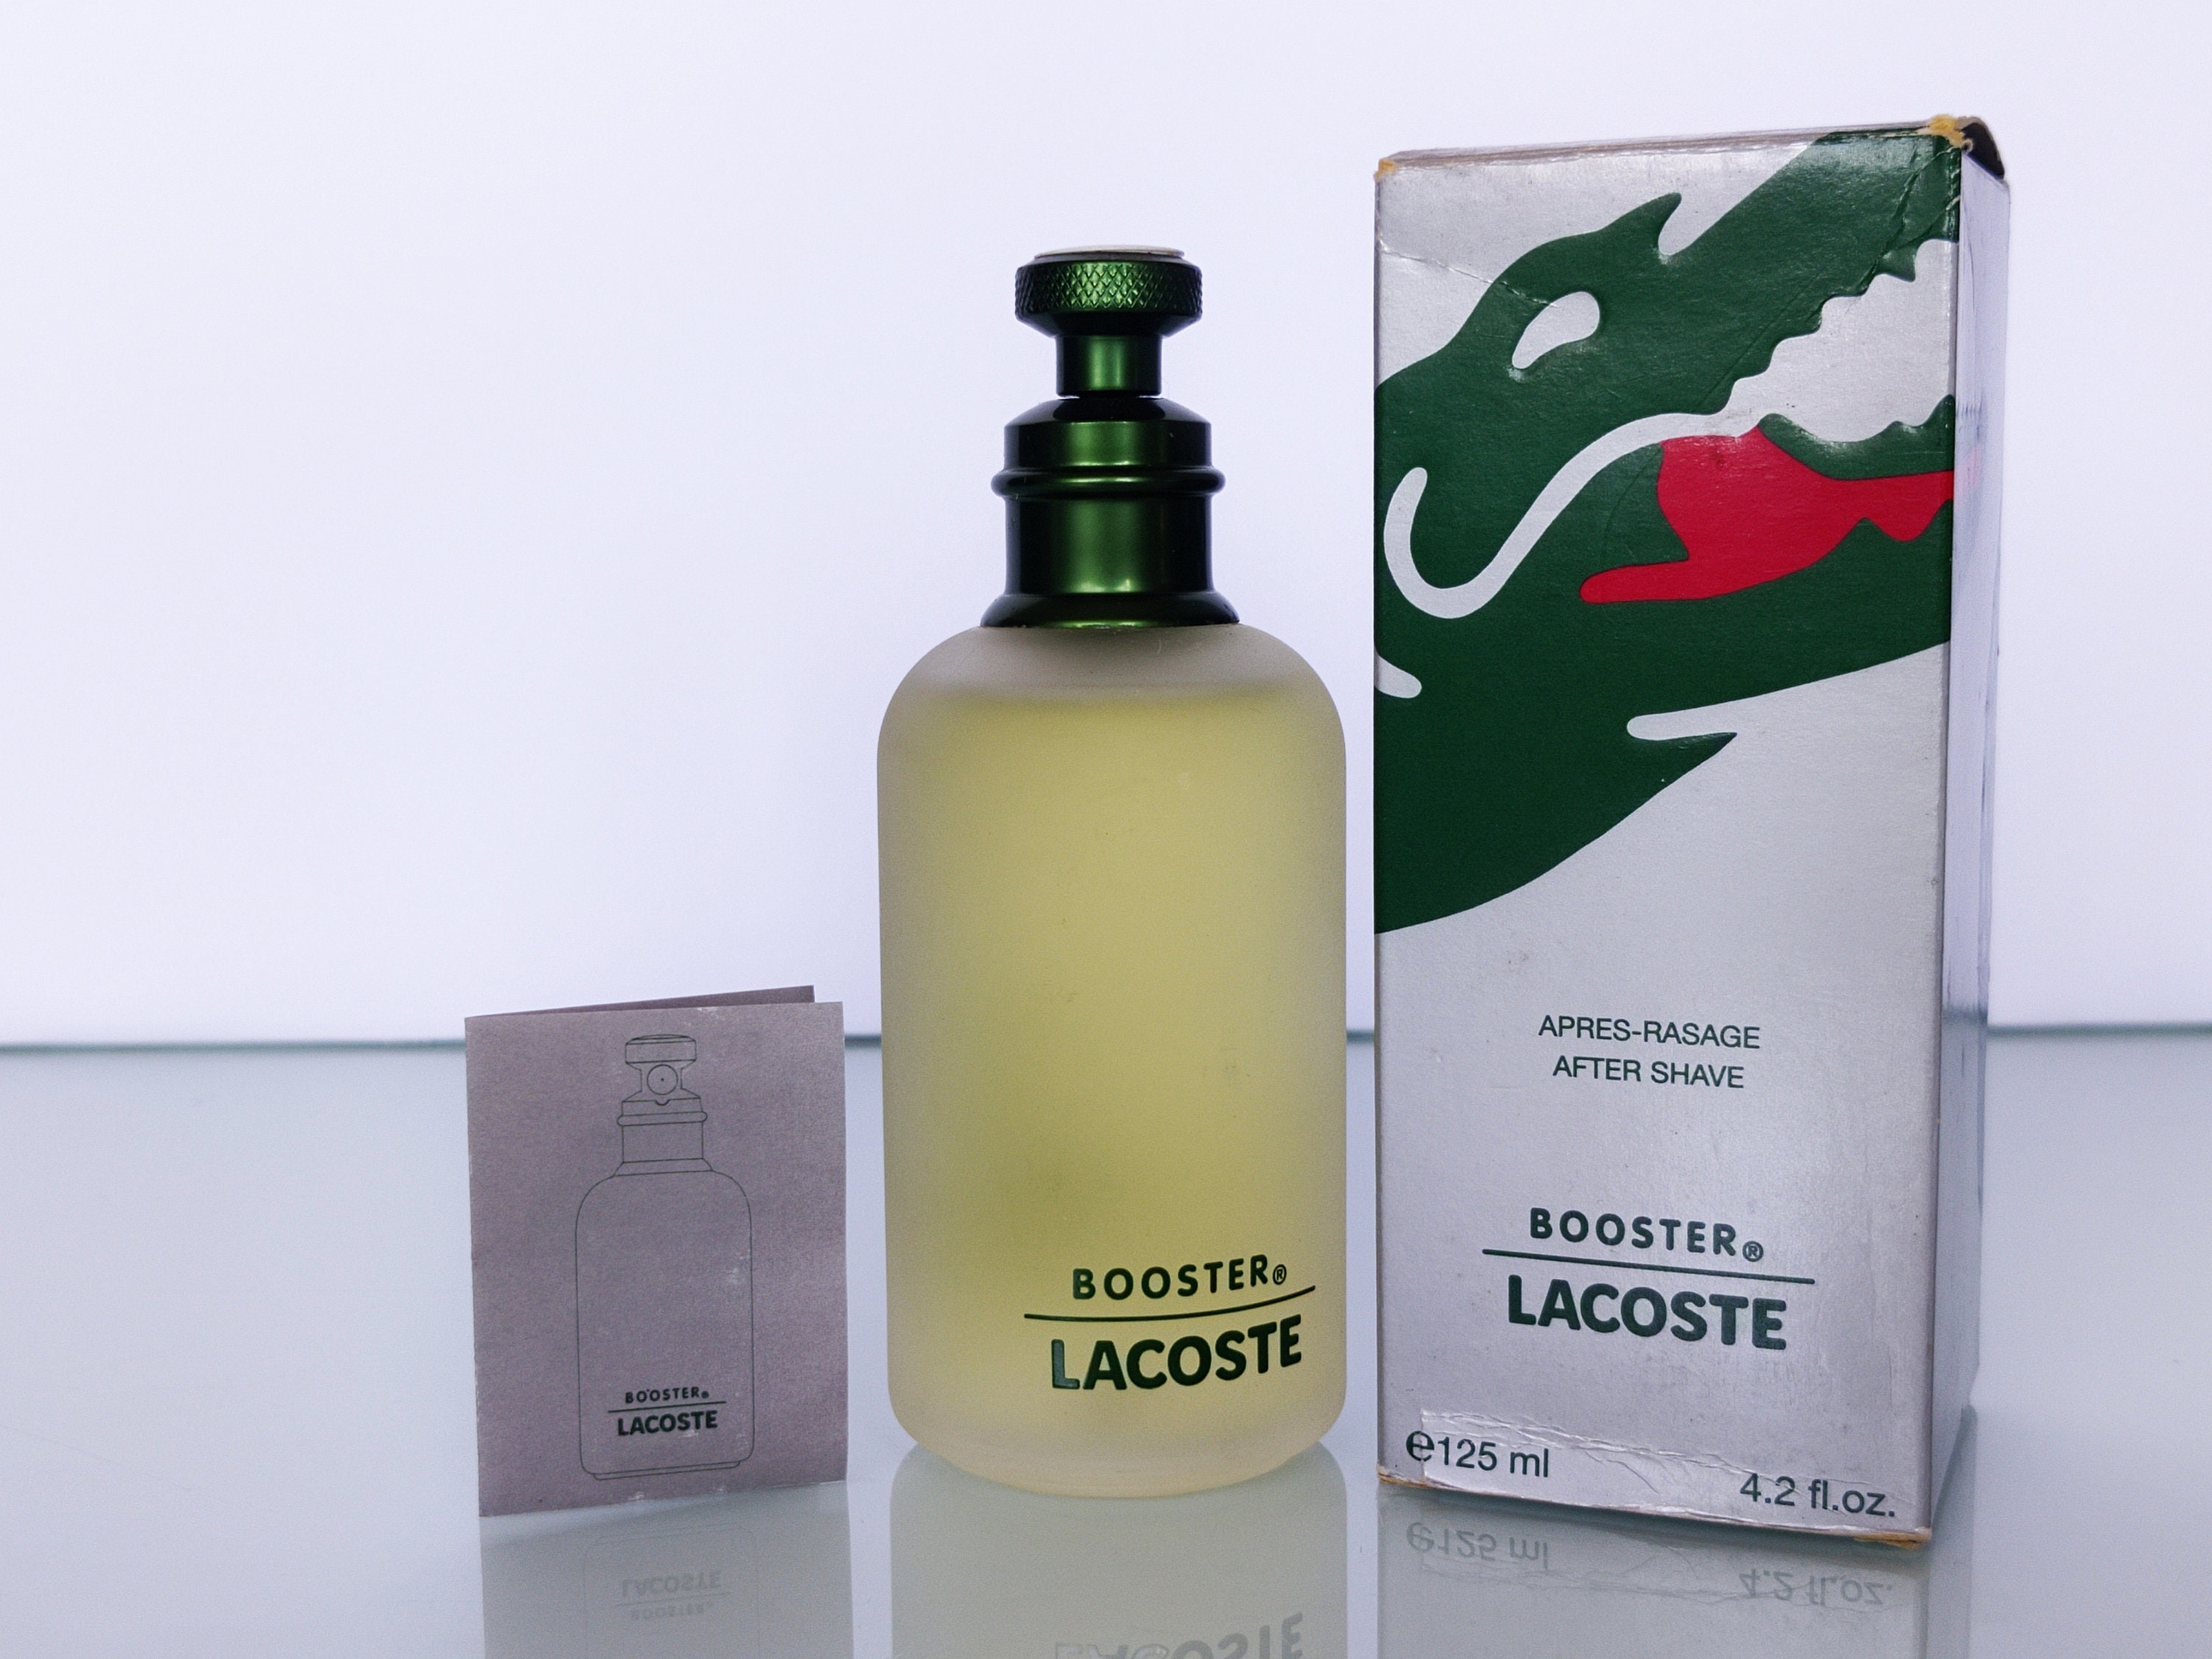 Booster 1996 by Lacoste After Shave 125 Ml/4.2 US Fl.oz. -  Finland